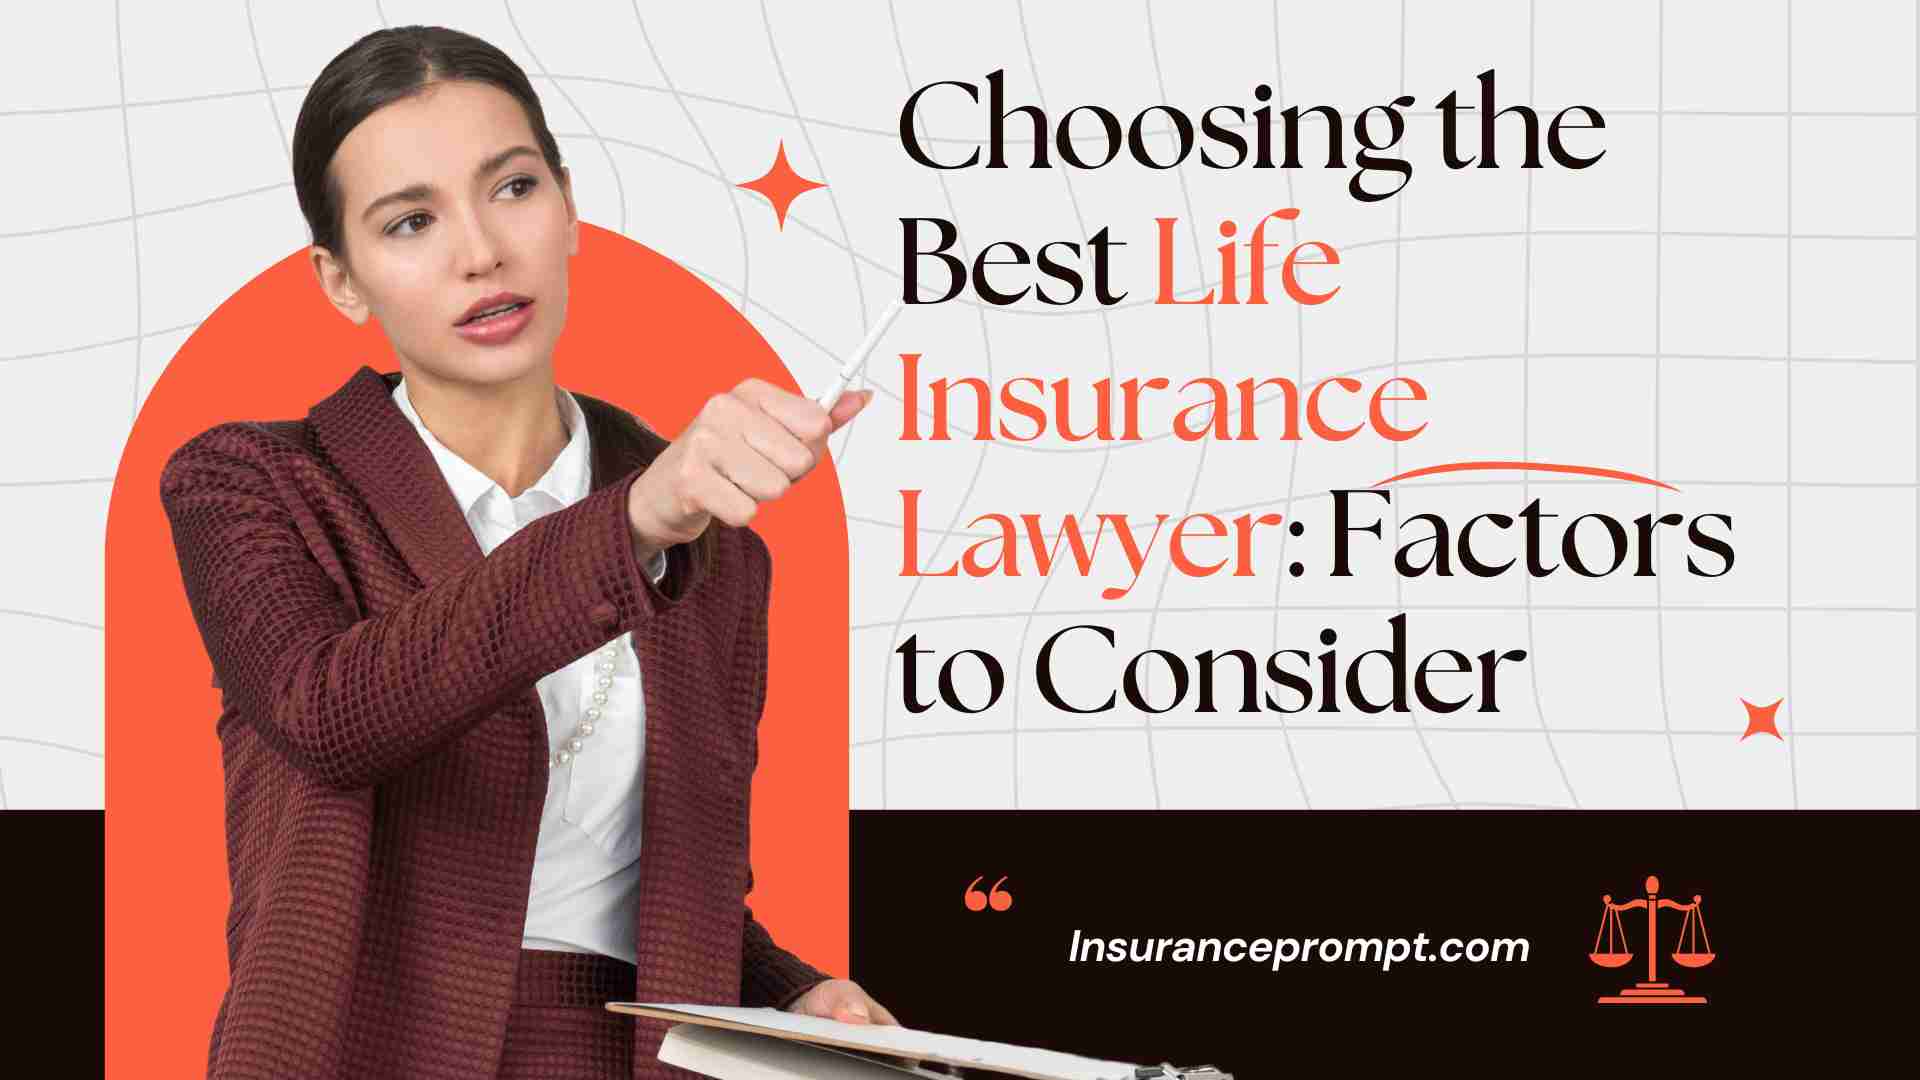 Choosing the Best Life Insurance Lawyer Factors to Consider